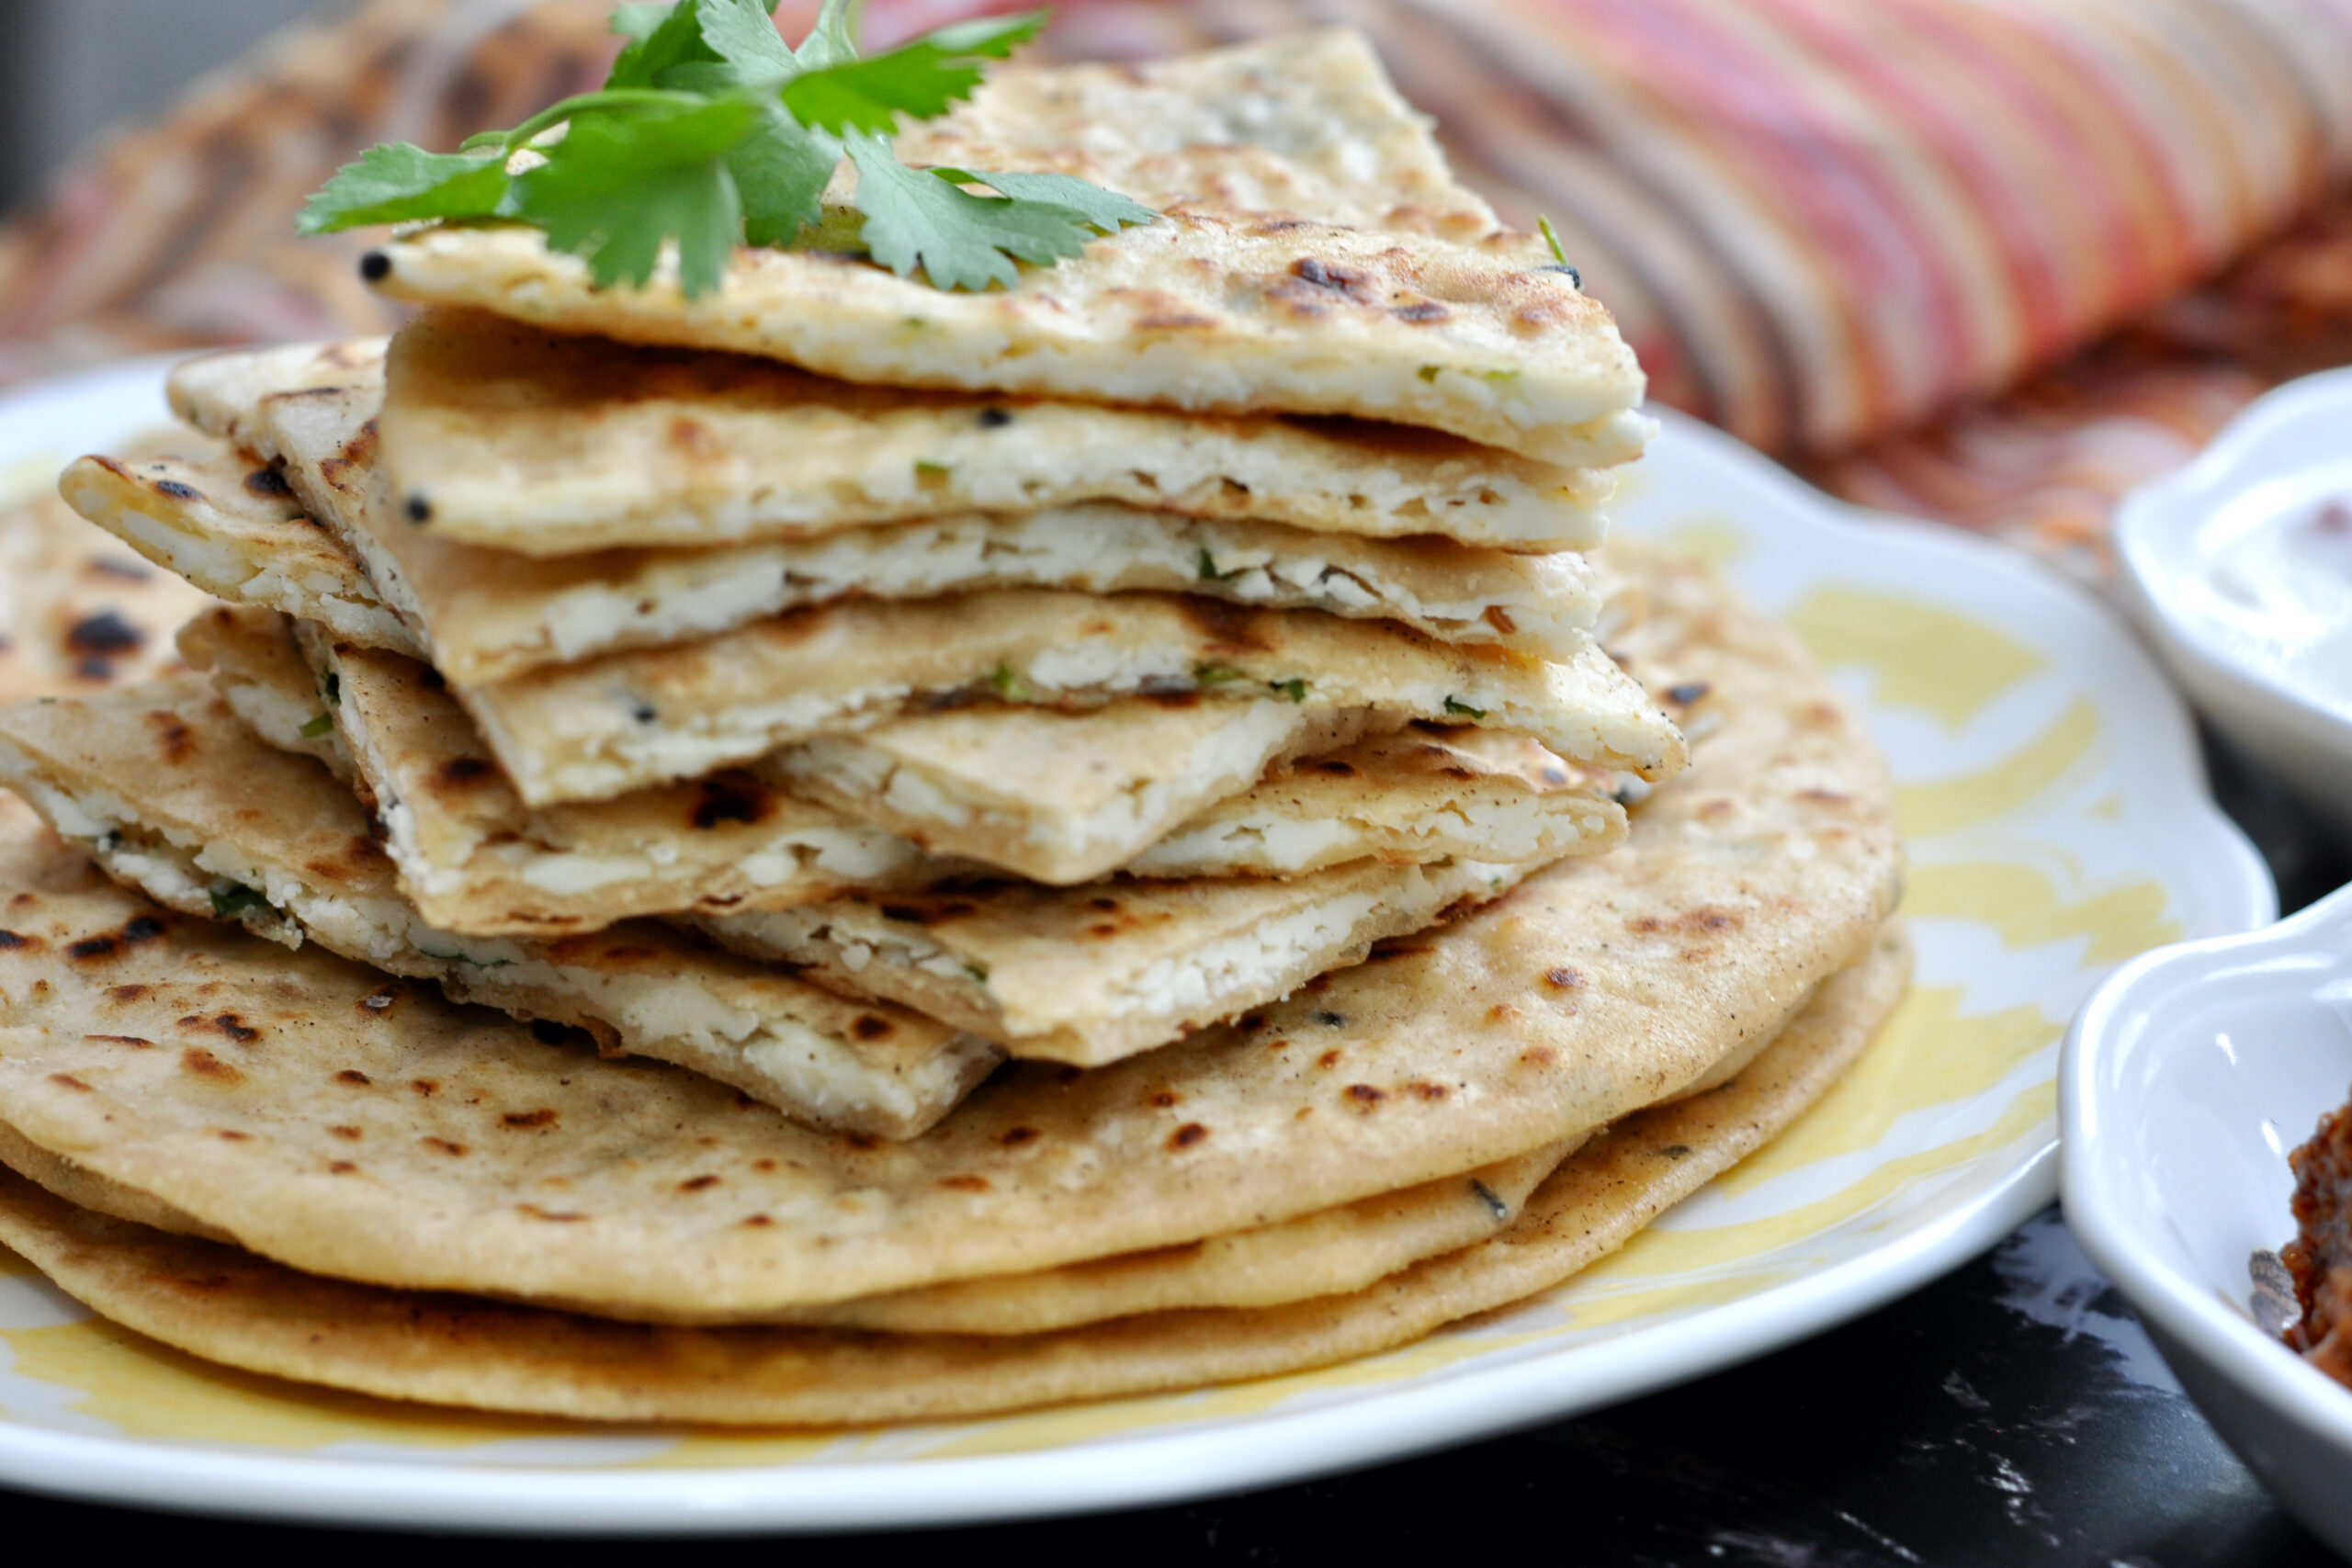 paneer paratha in a plate.